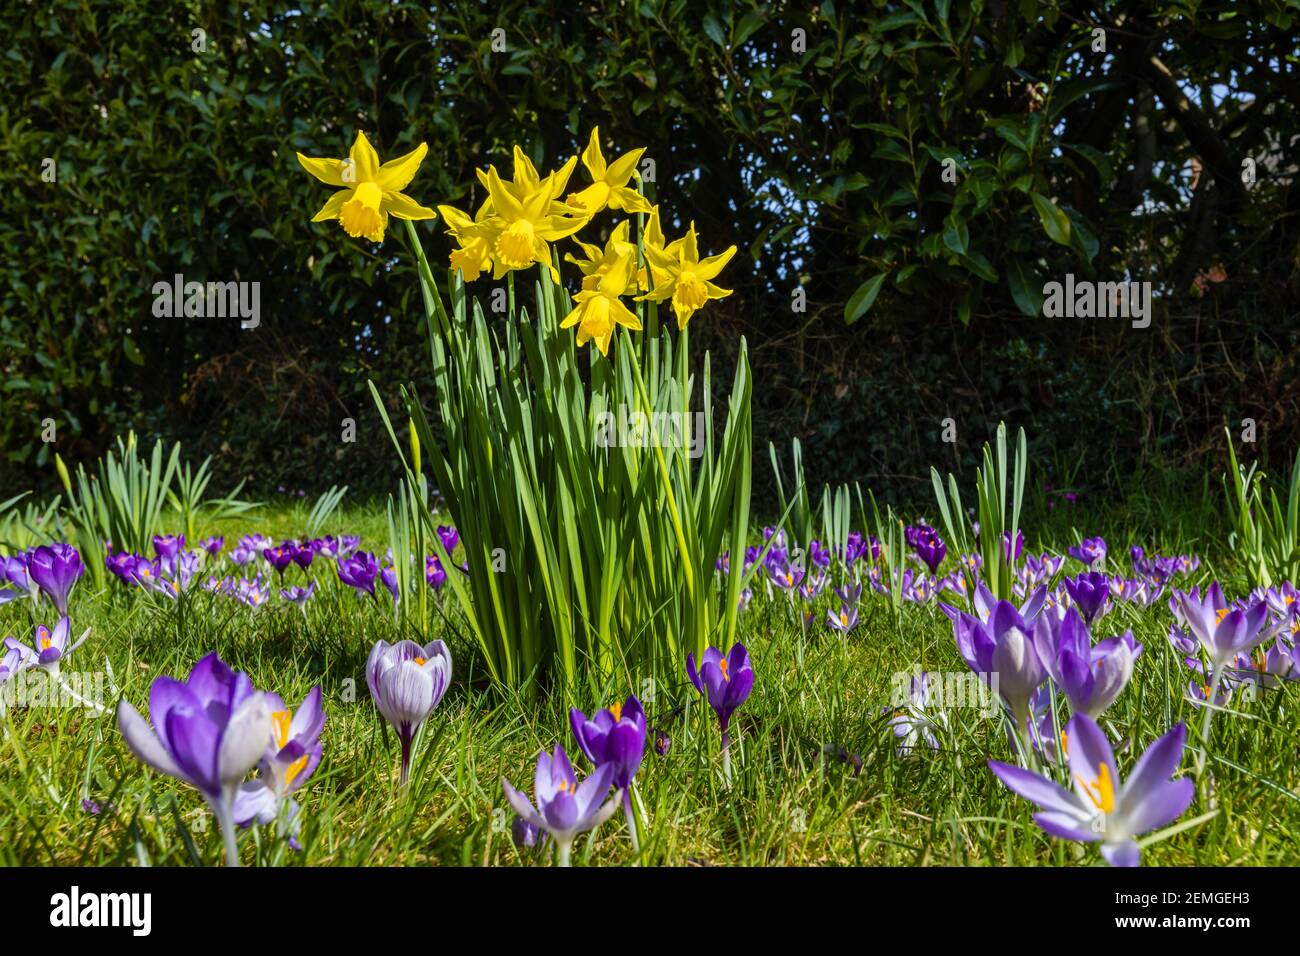 Early flowering Narcissus 'February Gold' blooming in winter in a grass lawn with open purple crocus flowers in a garden in Surrey, south-east England Stock Photo